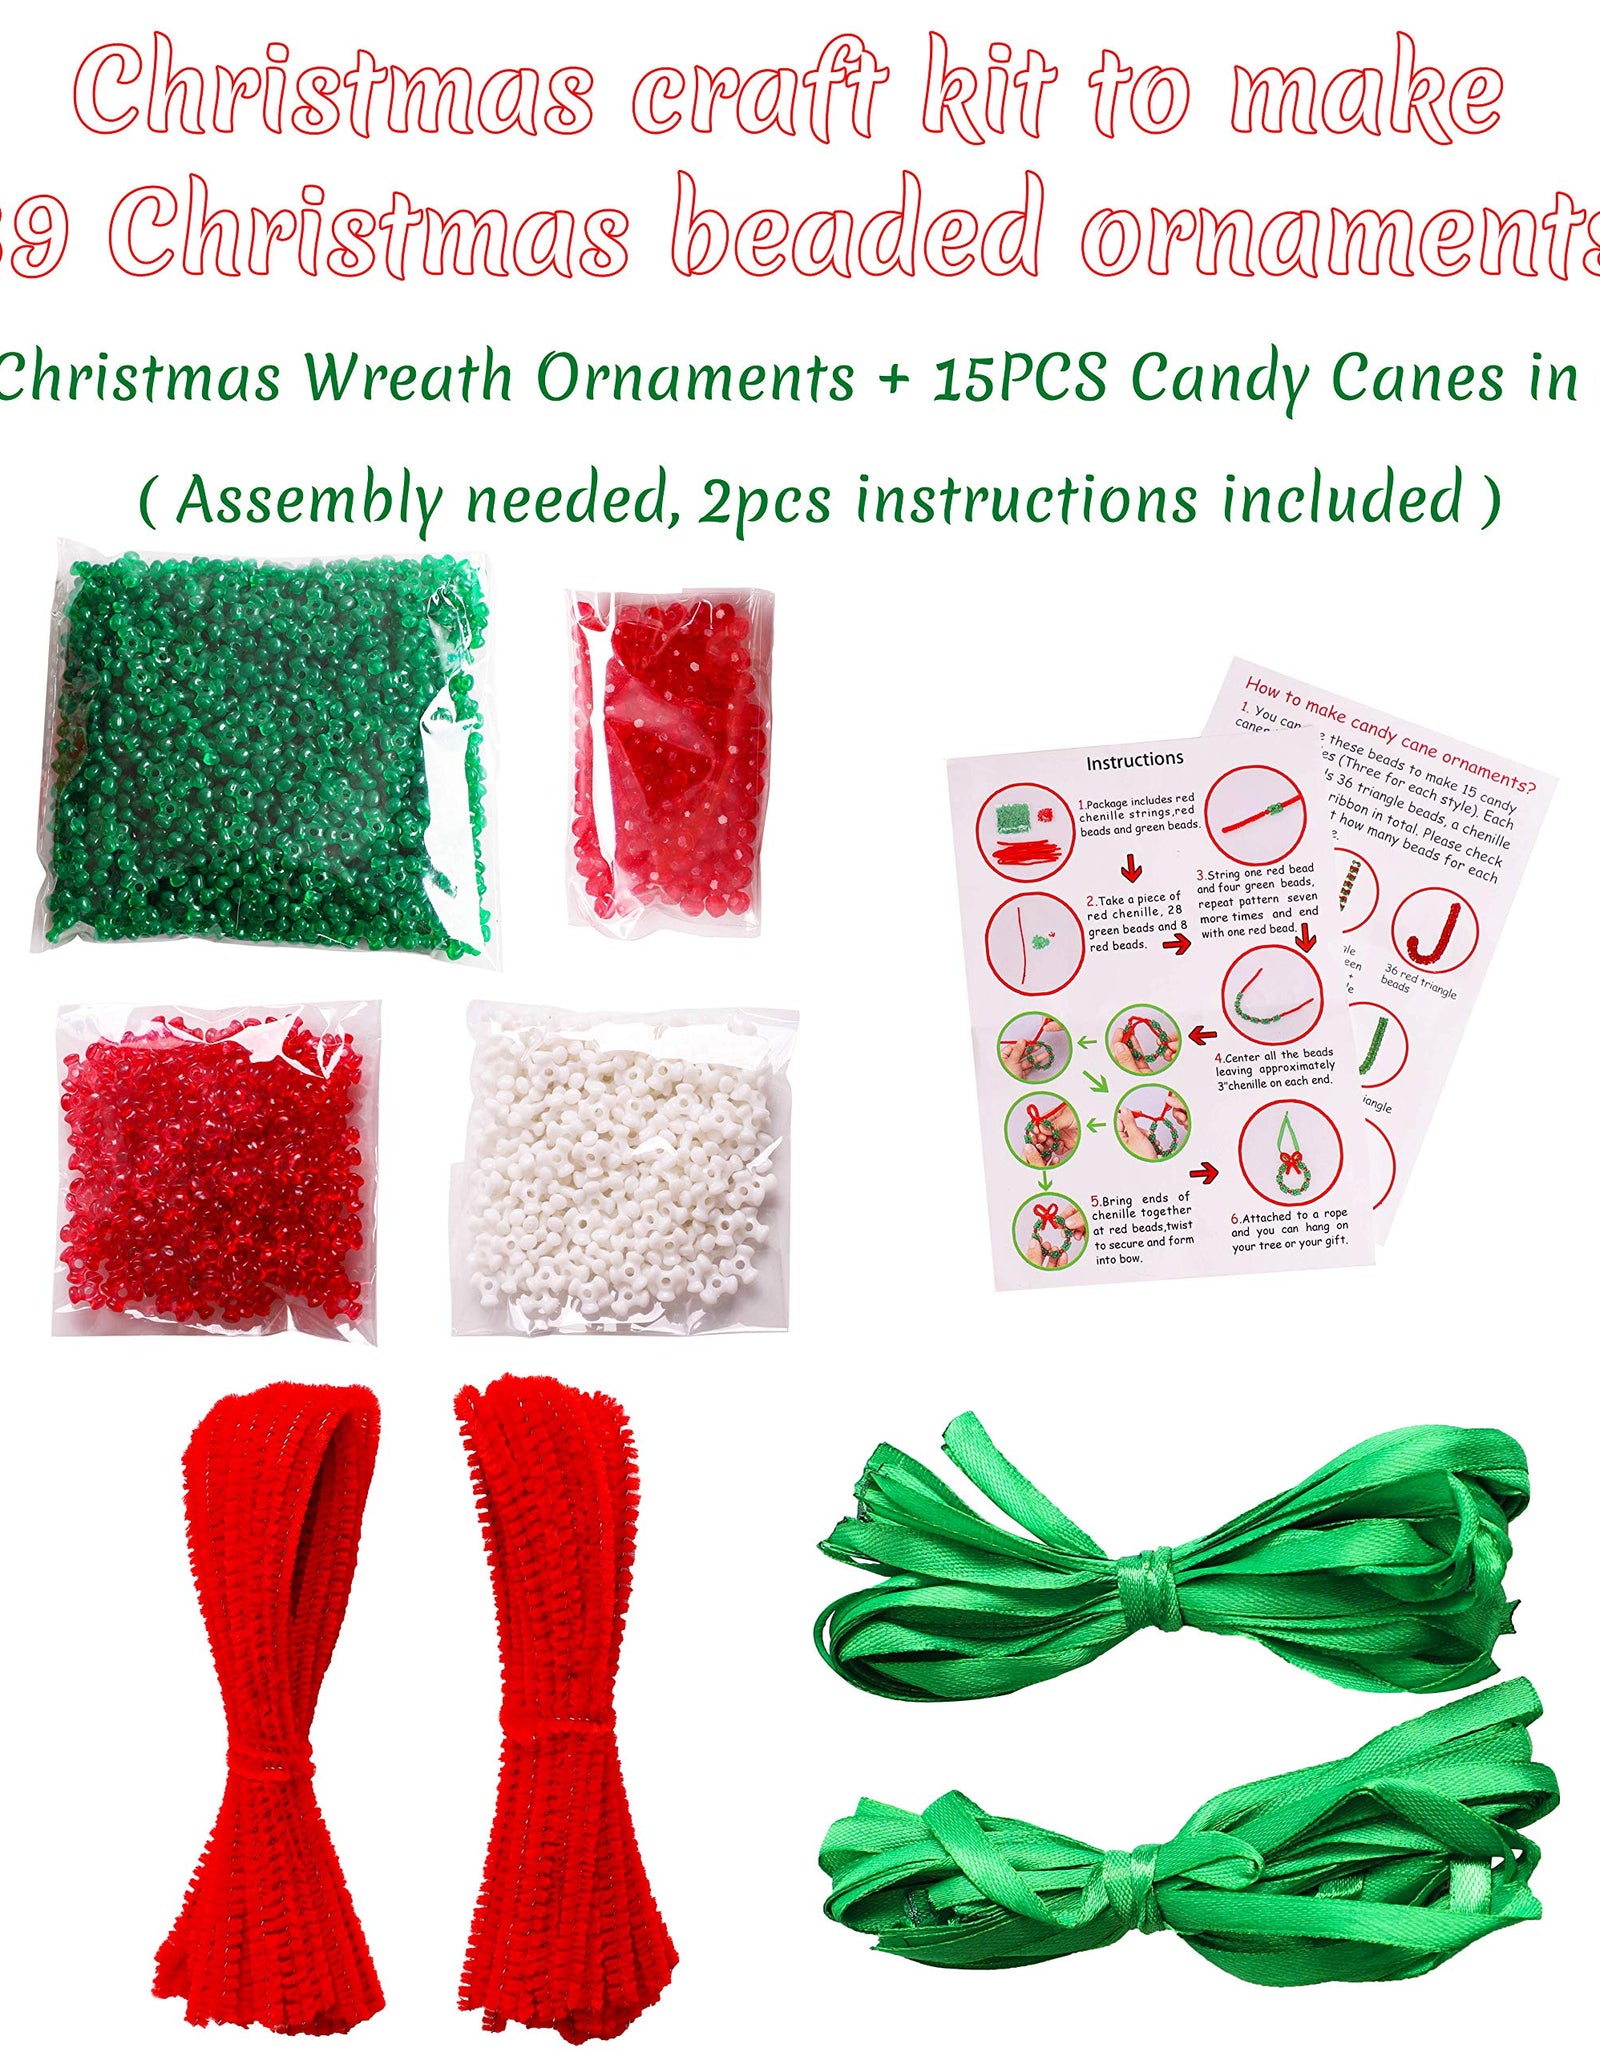 Christmas Beaded Ornament Kit - Xmas Party Craft Wreath Candy Cane Holiday Tree Decorations Kids Supplies, 39 Pieces